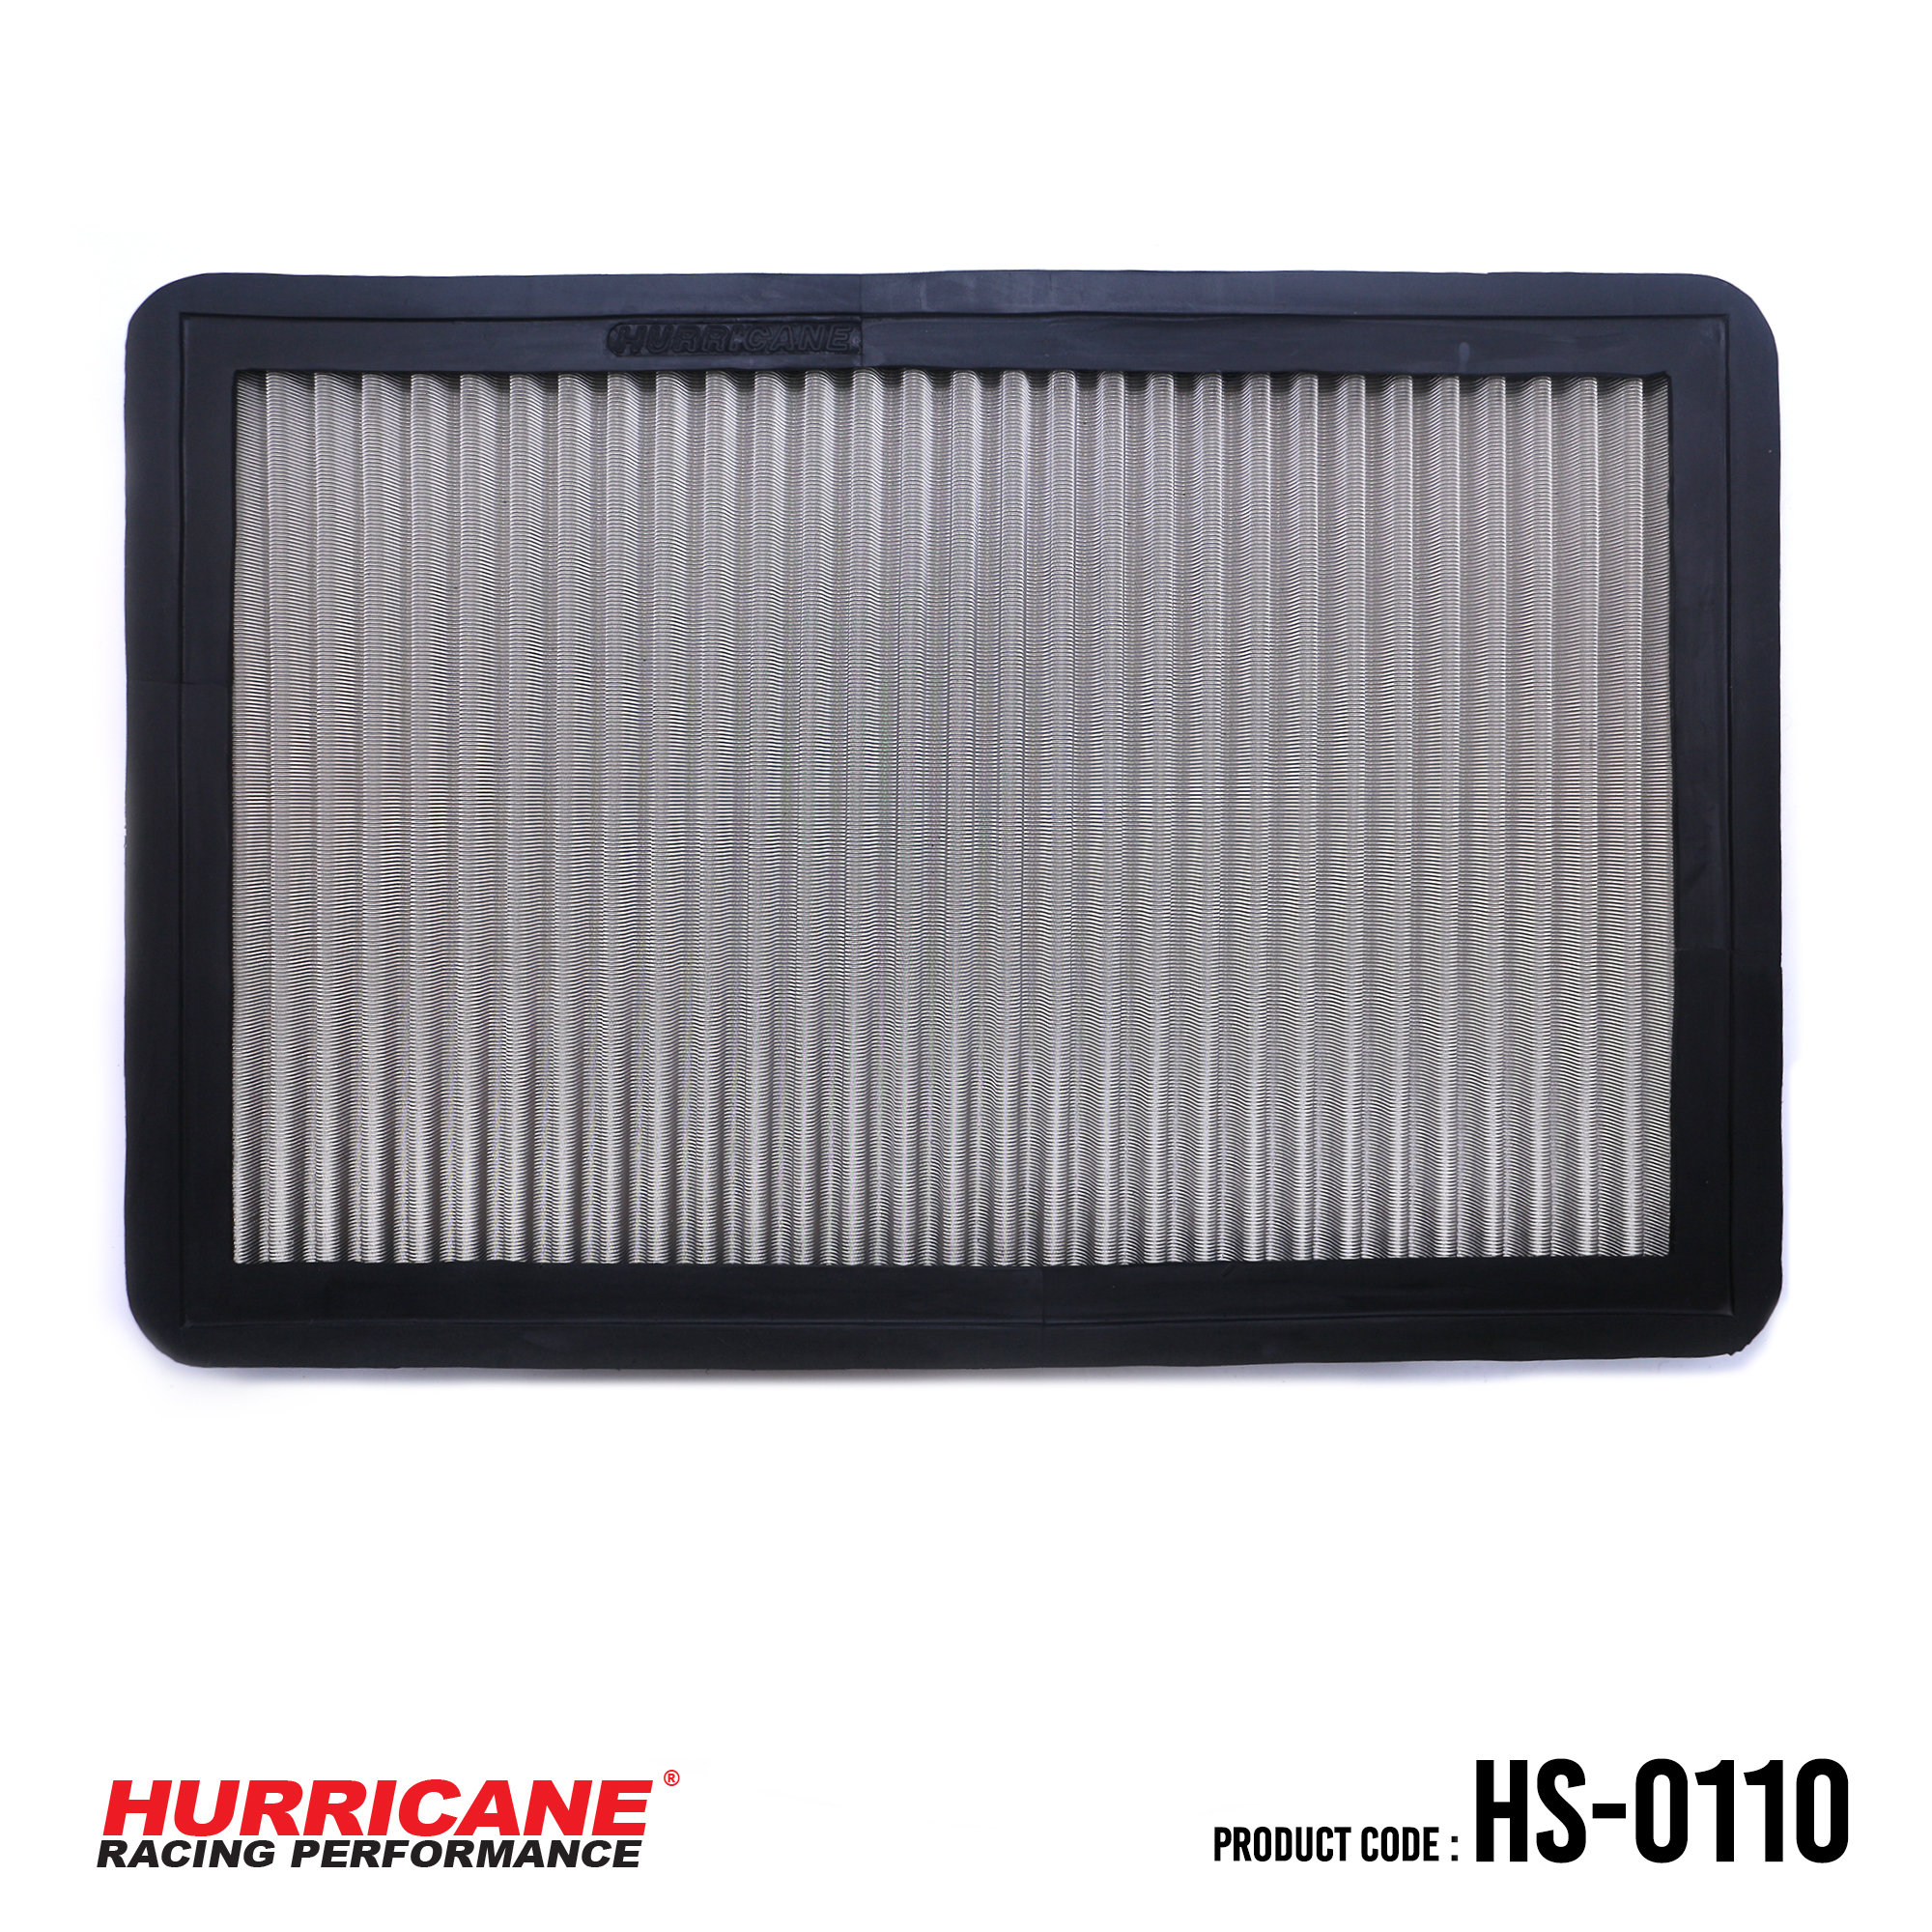 HURRICANE STAINLESS STEEL AIR FILTER FOR HS-0110 Mitsubishi